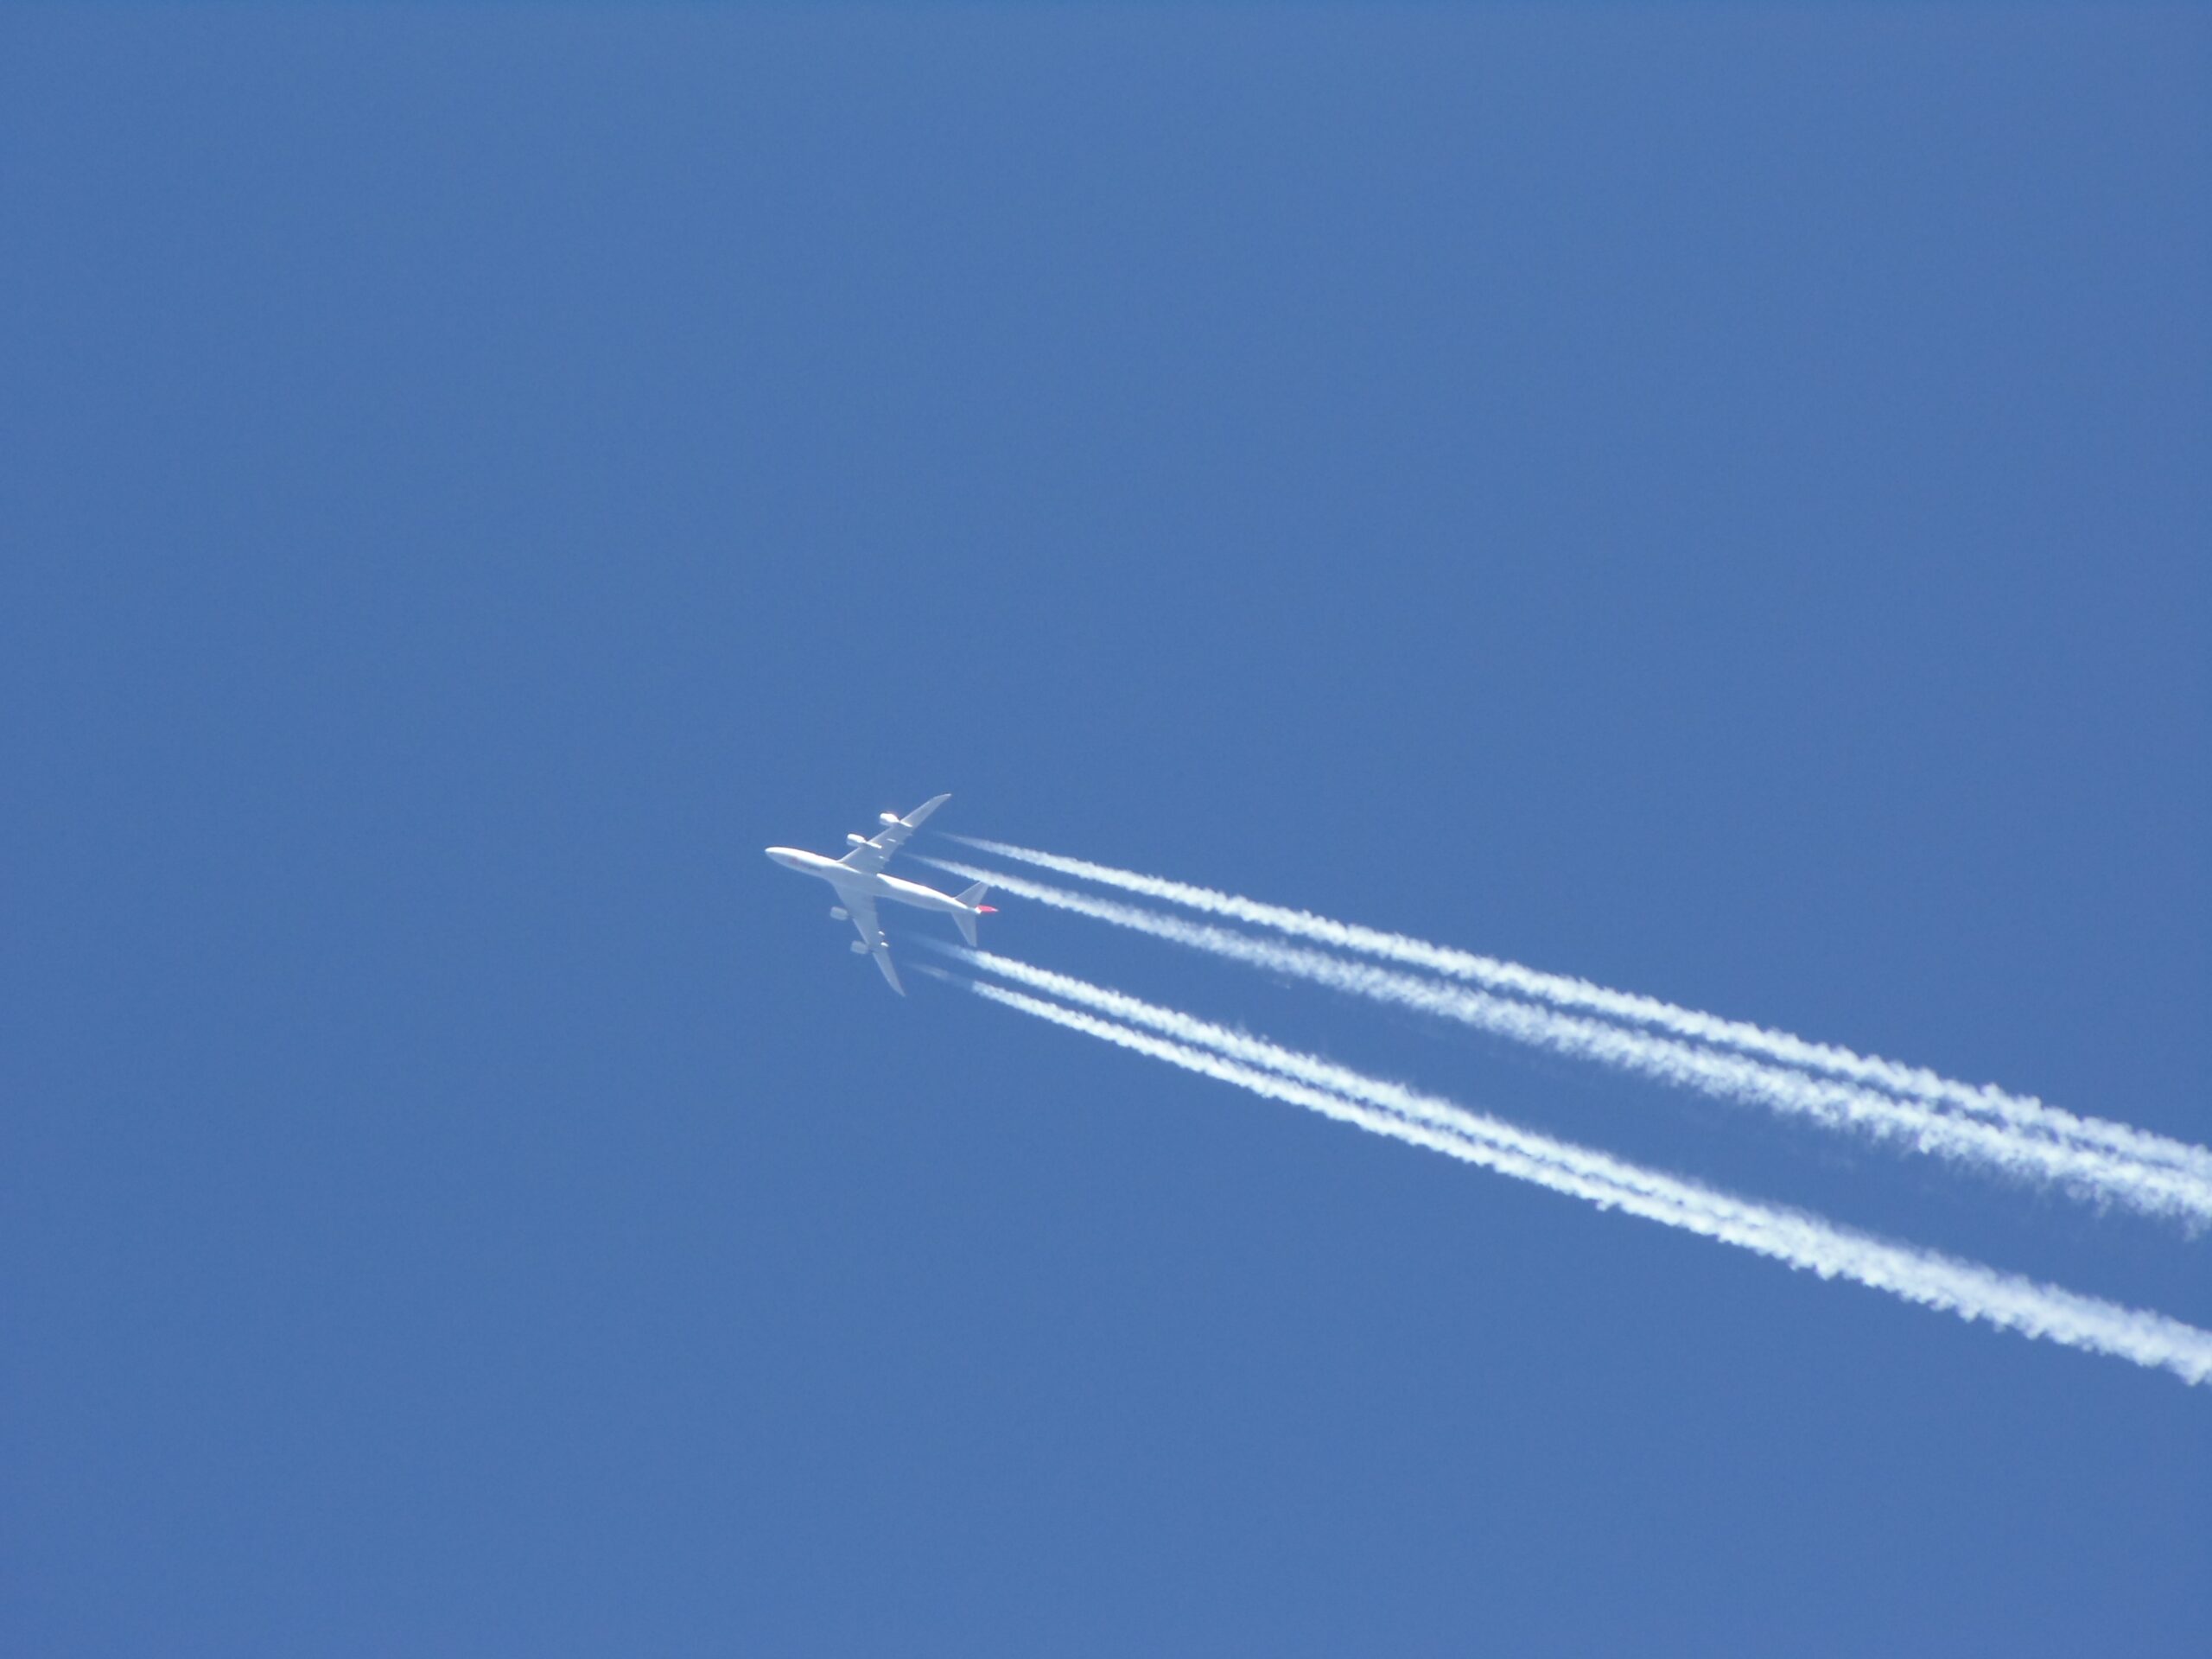 Contrails behind an airplane